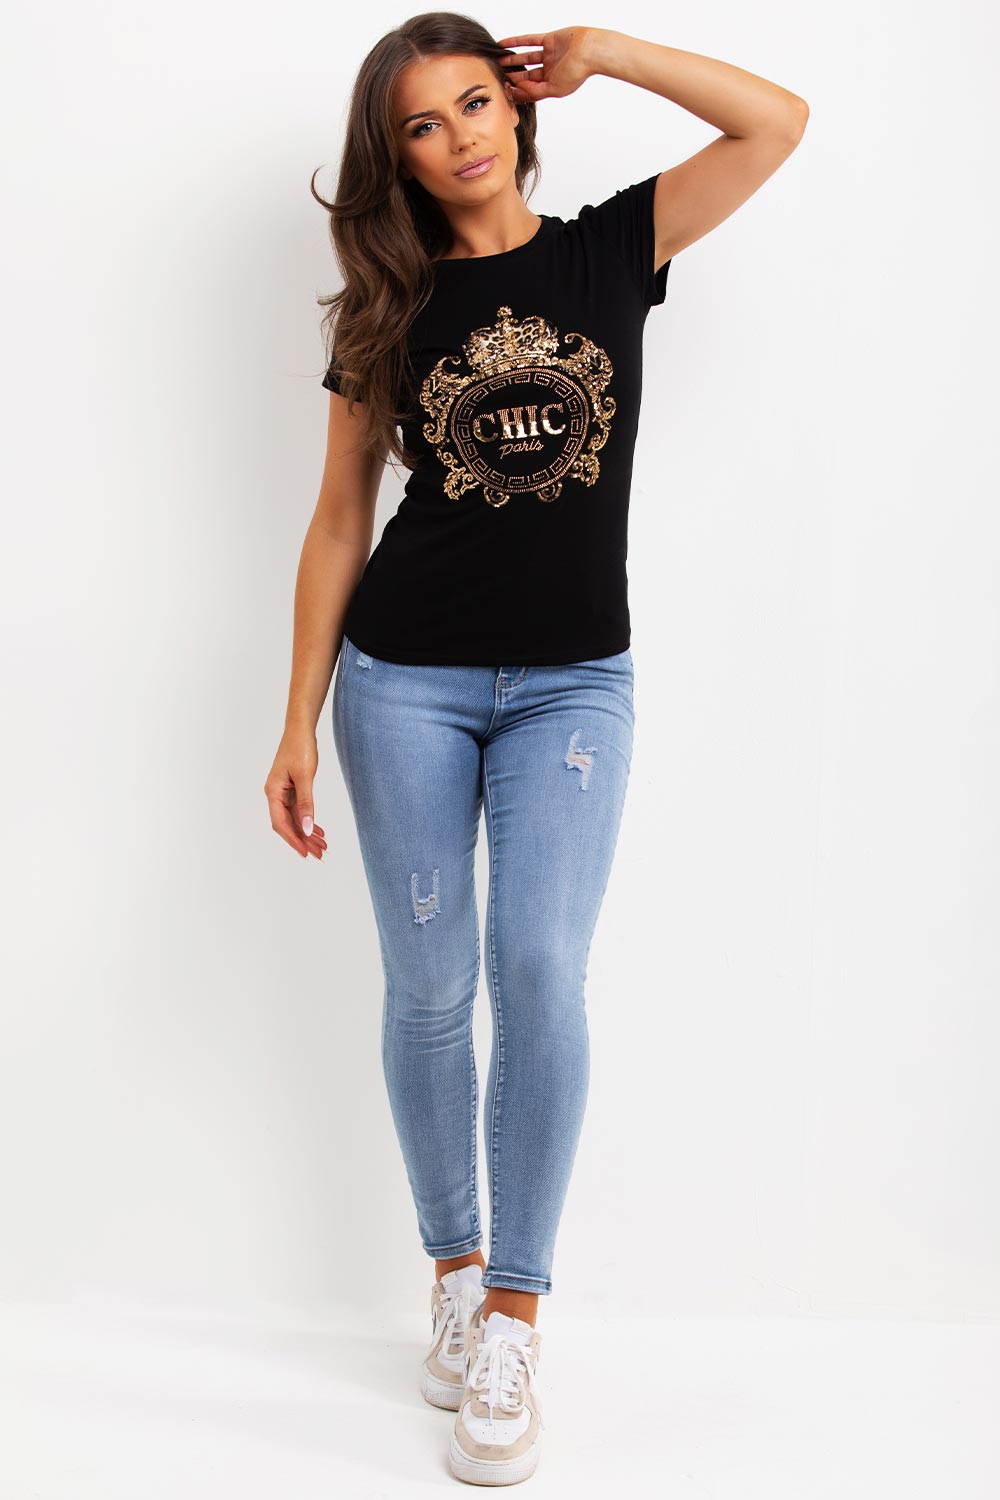 womens sparkly chic paris t shirt with gold sequin detail